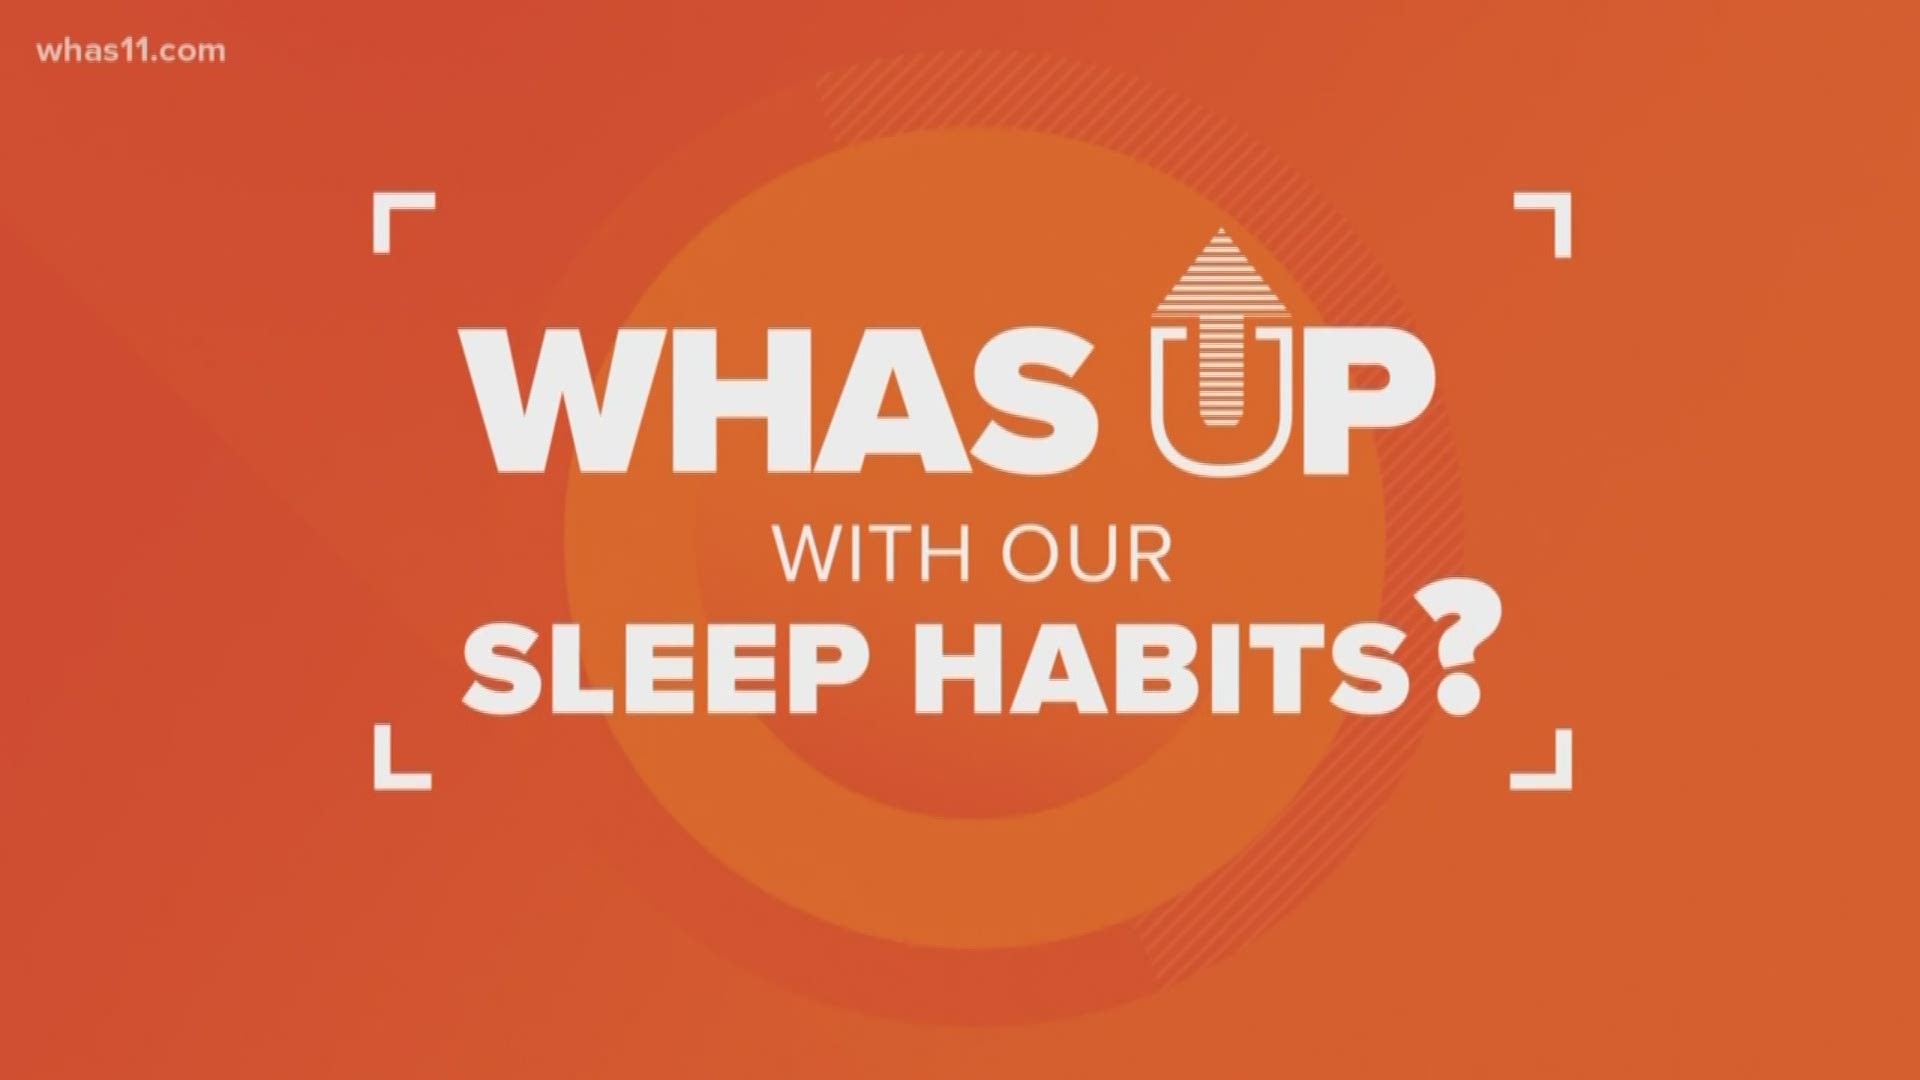 How many hours of sleep do you need to feel refreshed? It has more to do with who you are than what you do. Here's a look at the science of our sleep.